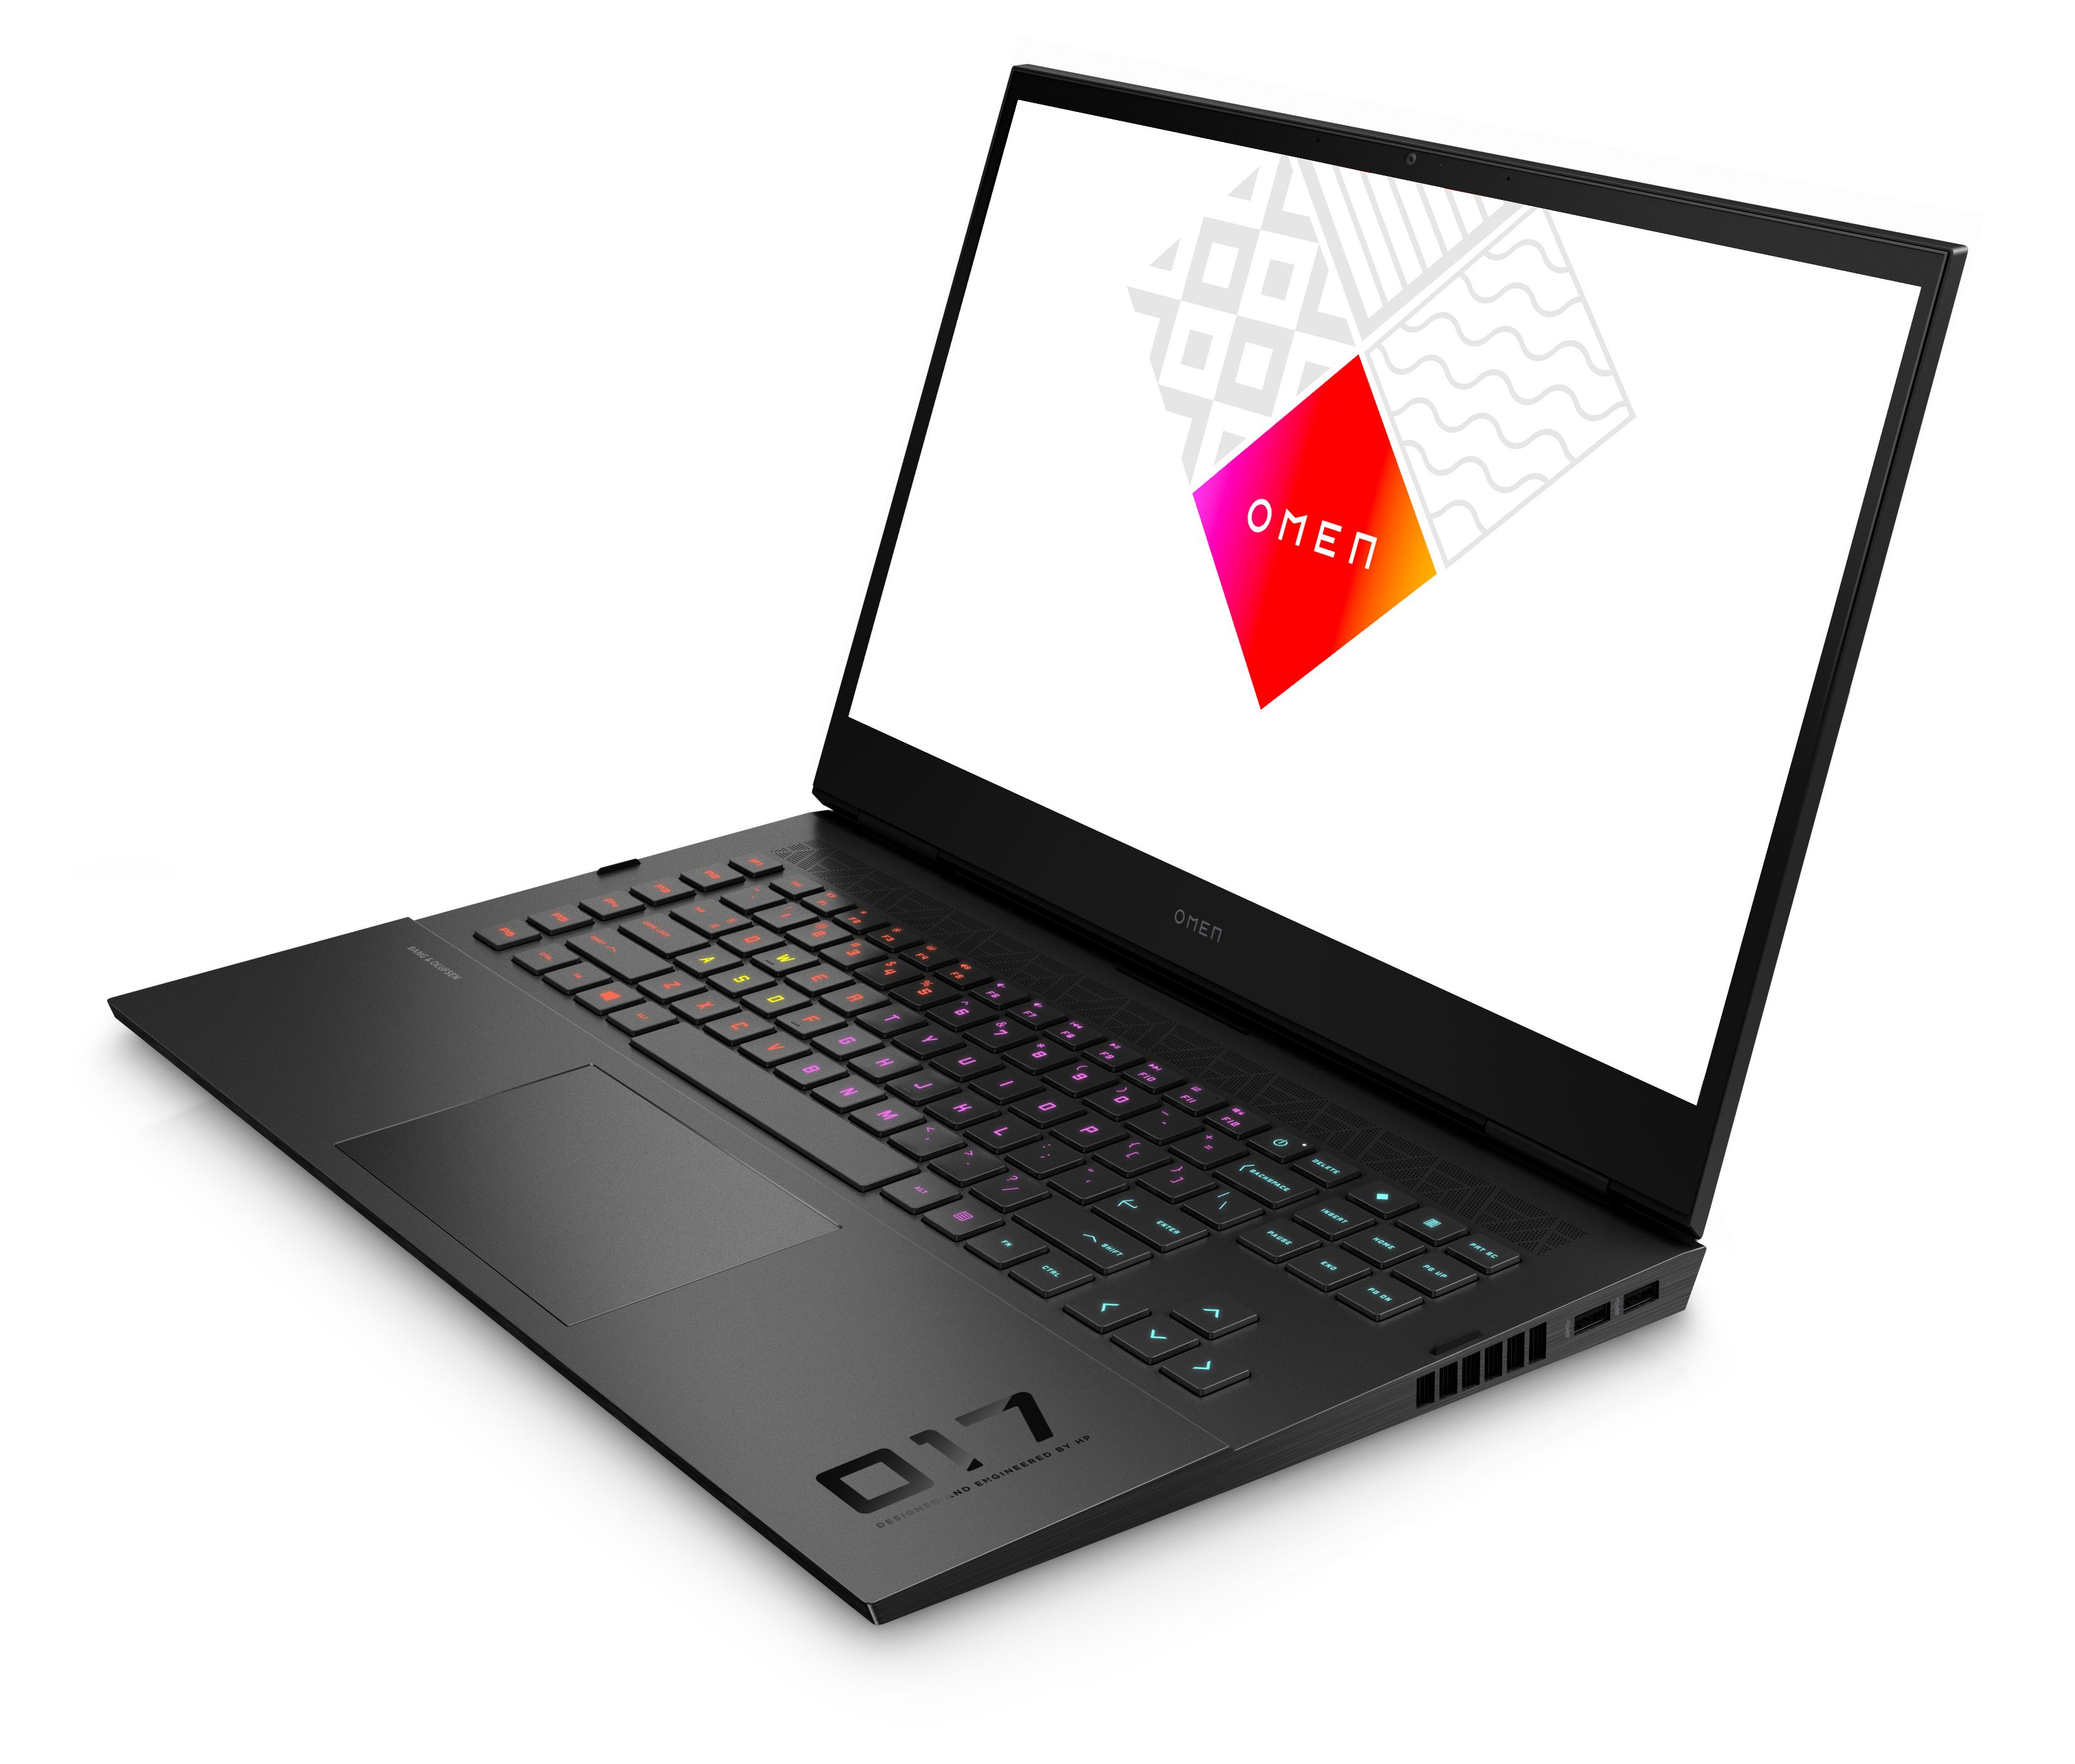 HP Omen 17 gaming laptop refreshed with new Intel/Nvidia hardware, an optical mechanical keyboard and plenty of I/O